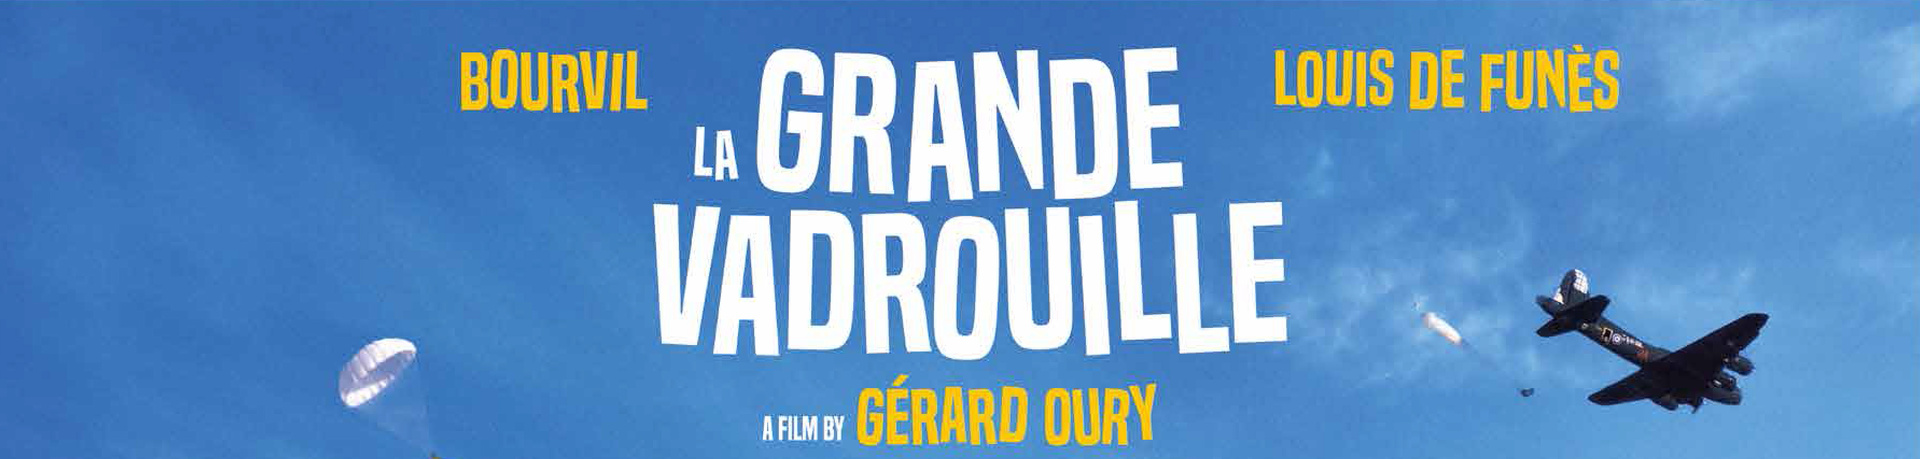 Image of La Grande Vadrouille (Don't look now, we're being shot at)